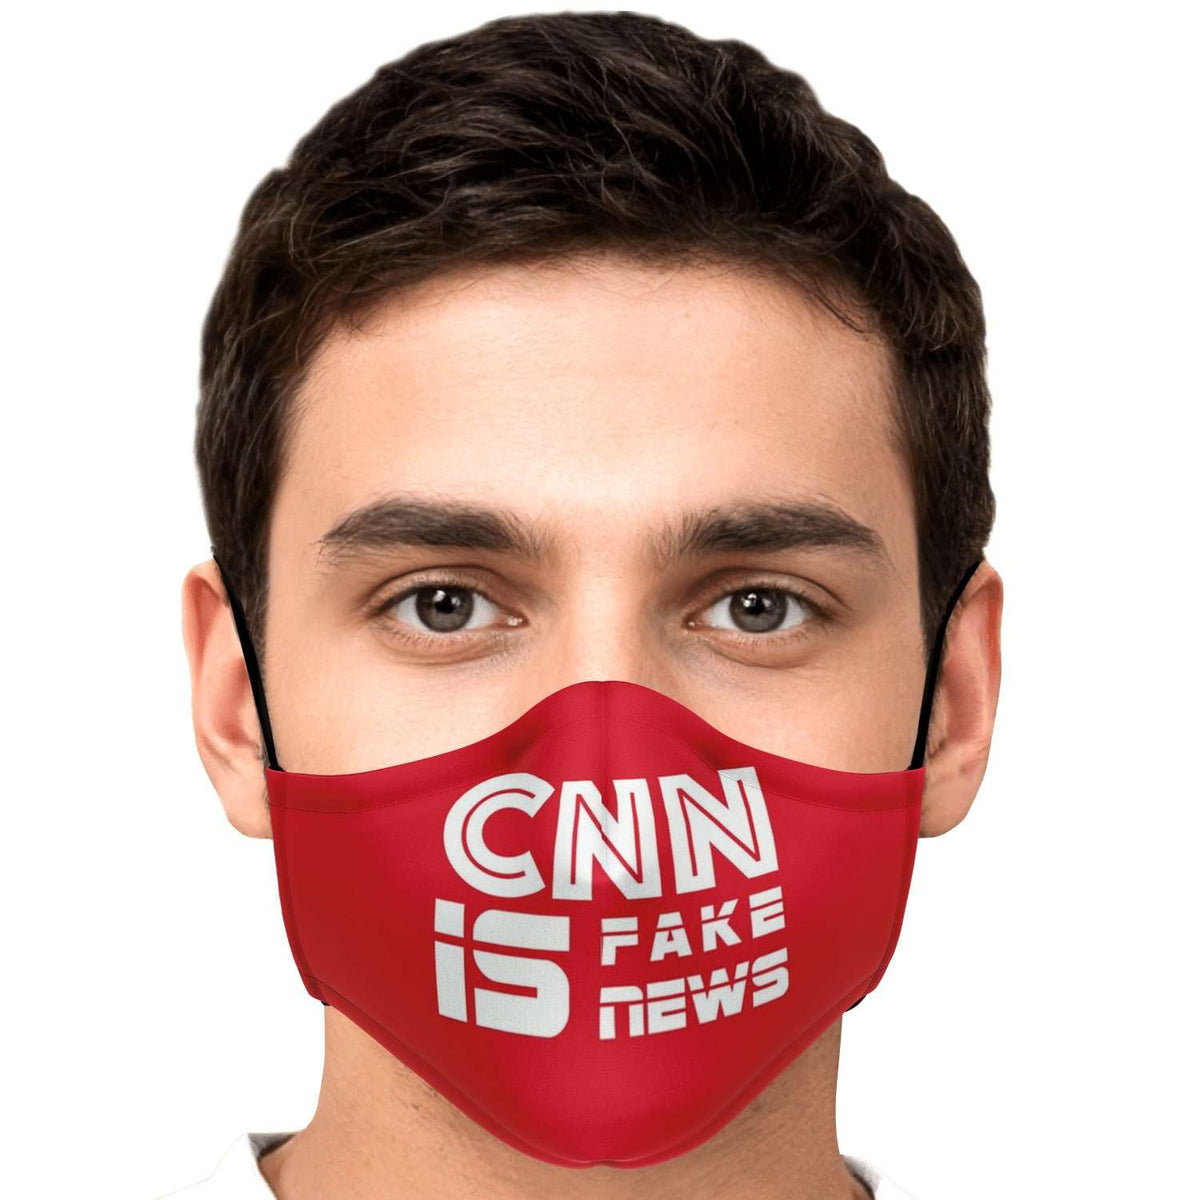 Designs by MyUtopia Shout Out:CNN is Fake News Fitted Fabric Face Mask with Adjustable Ear Loops.,Adult / Single / No filters,Fabric Face Mask